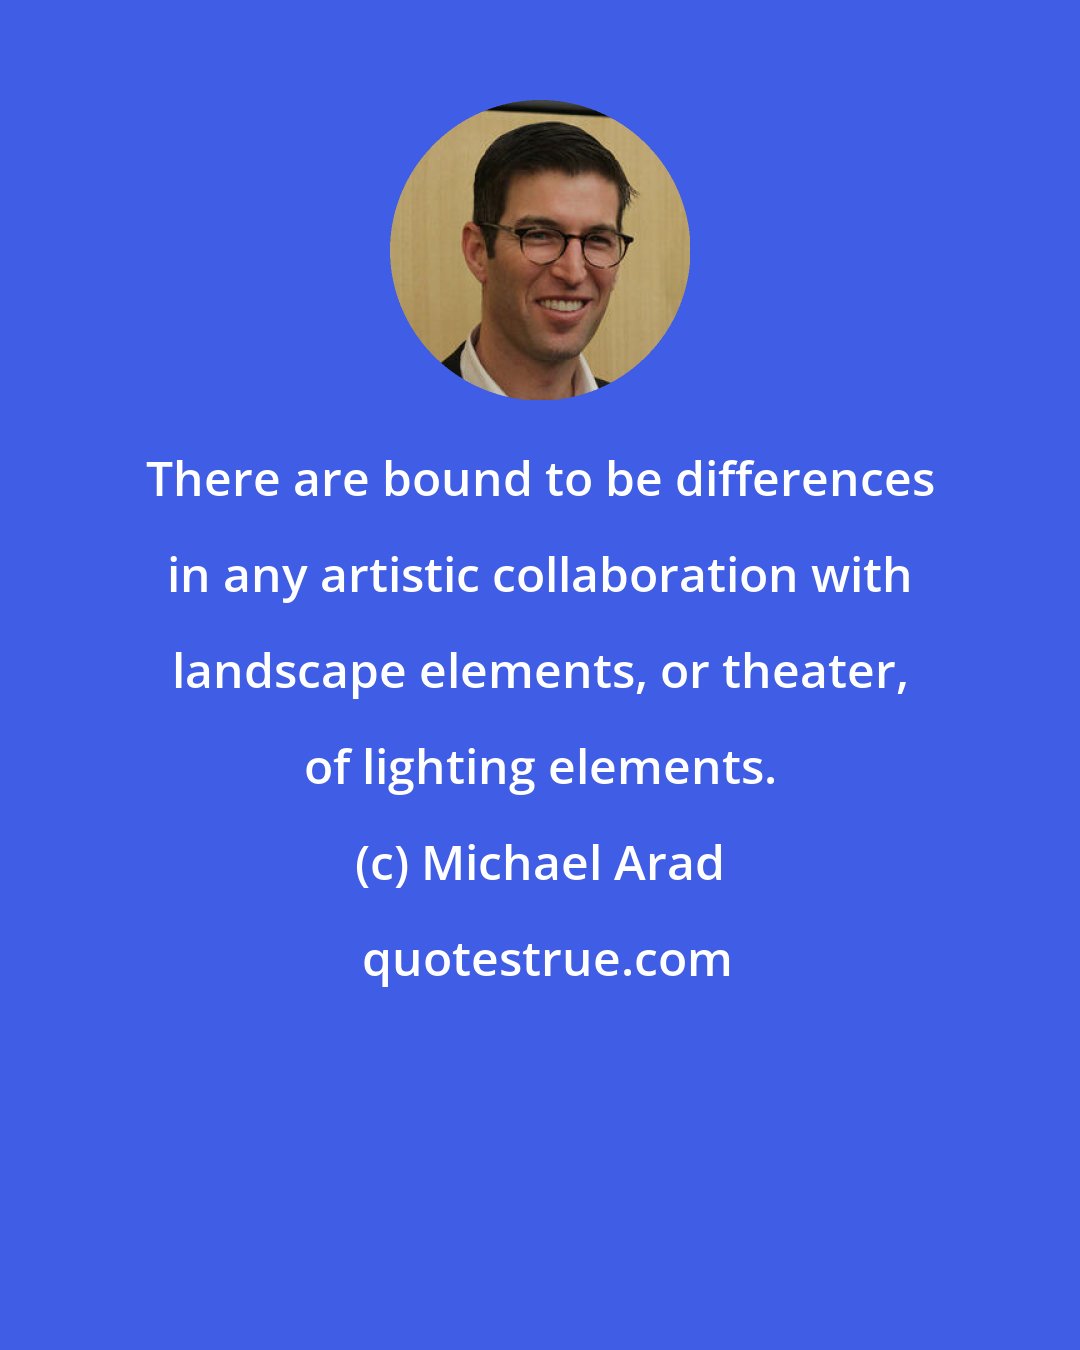 Michael Arad: There are bound to be differences in any artistic collaboration with landscape elements, or theater, of lighting elements.